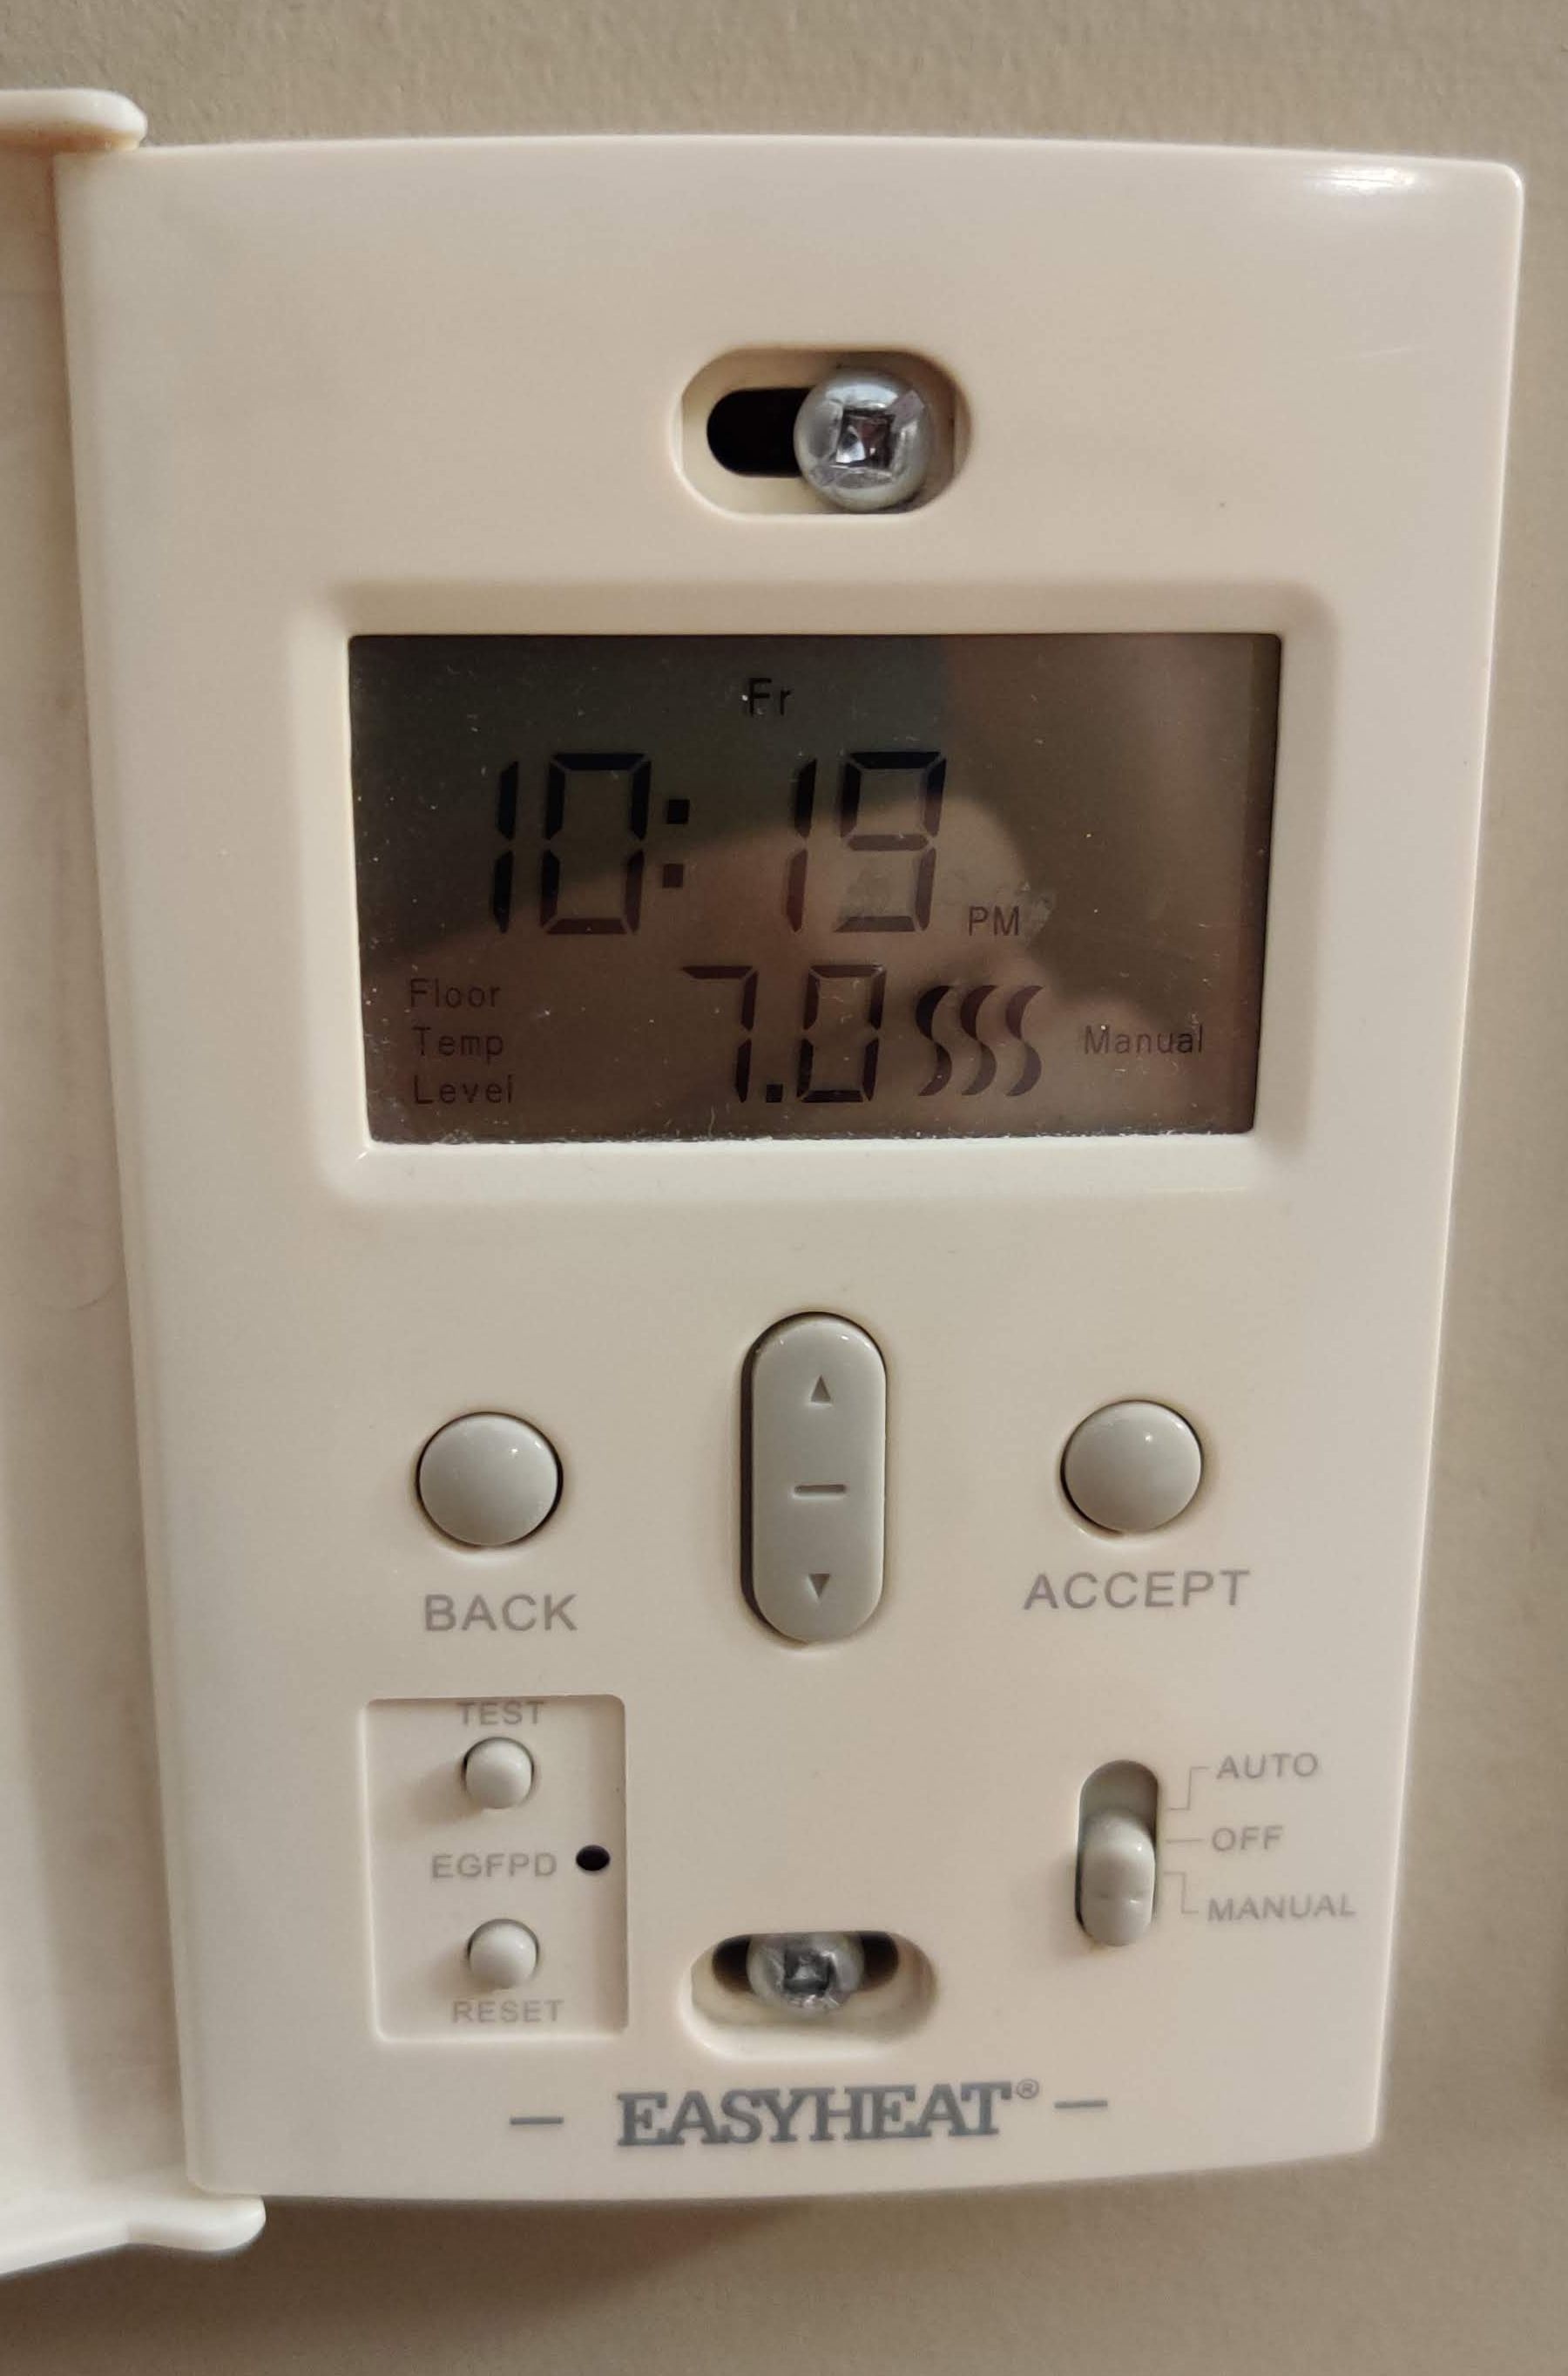 In-Floor Heating Thermostat with Home Assistant and Shelly